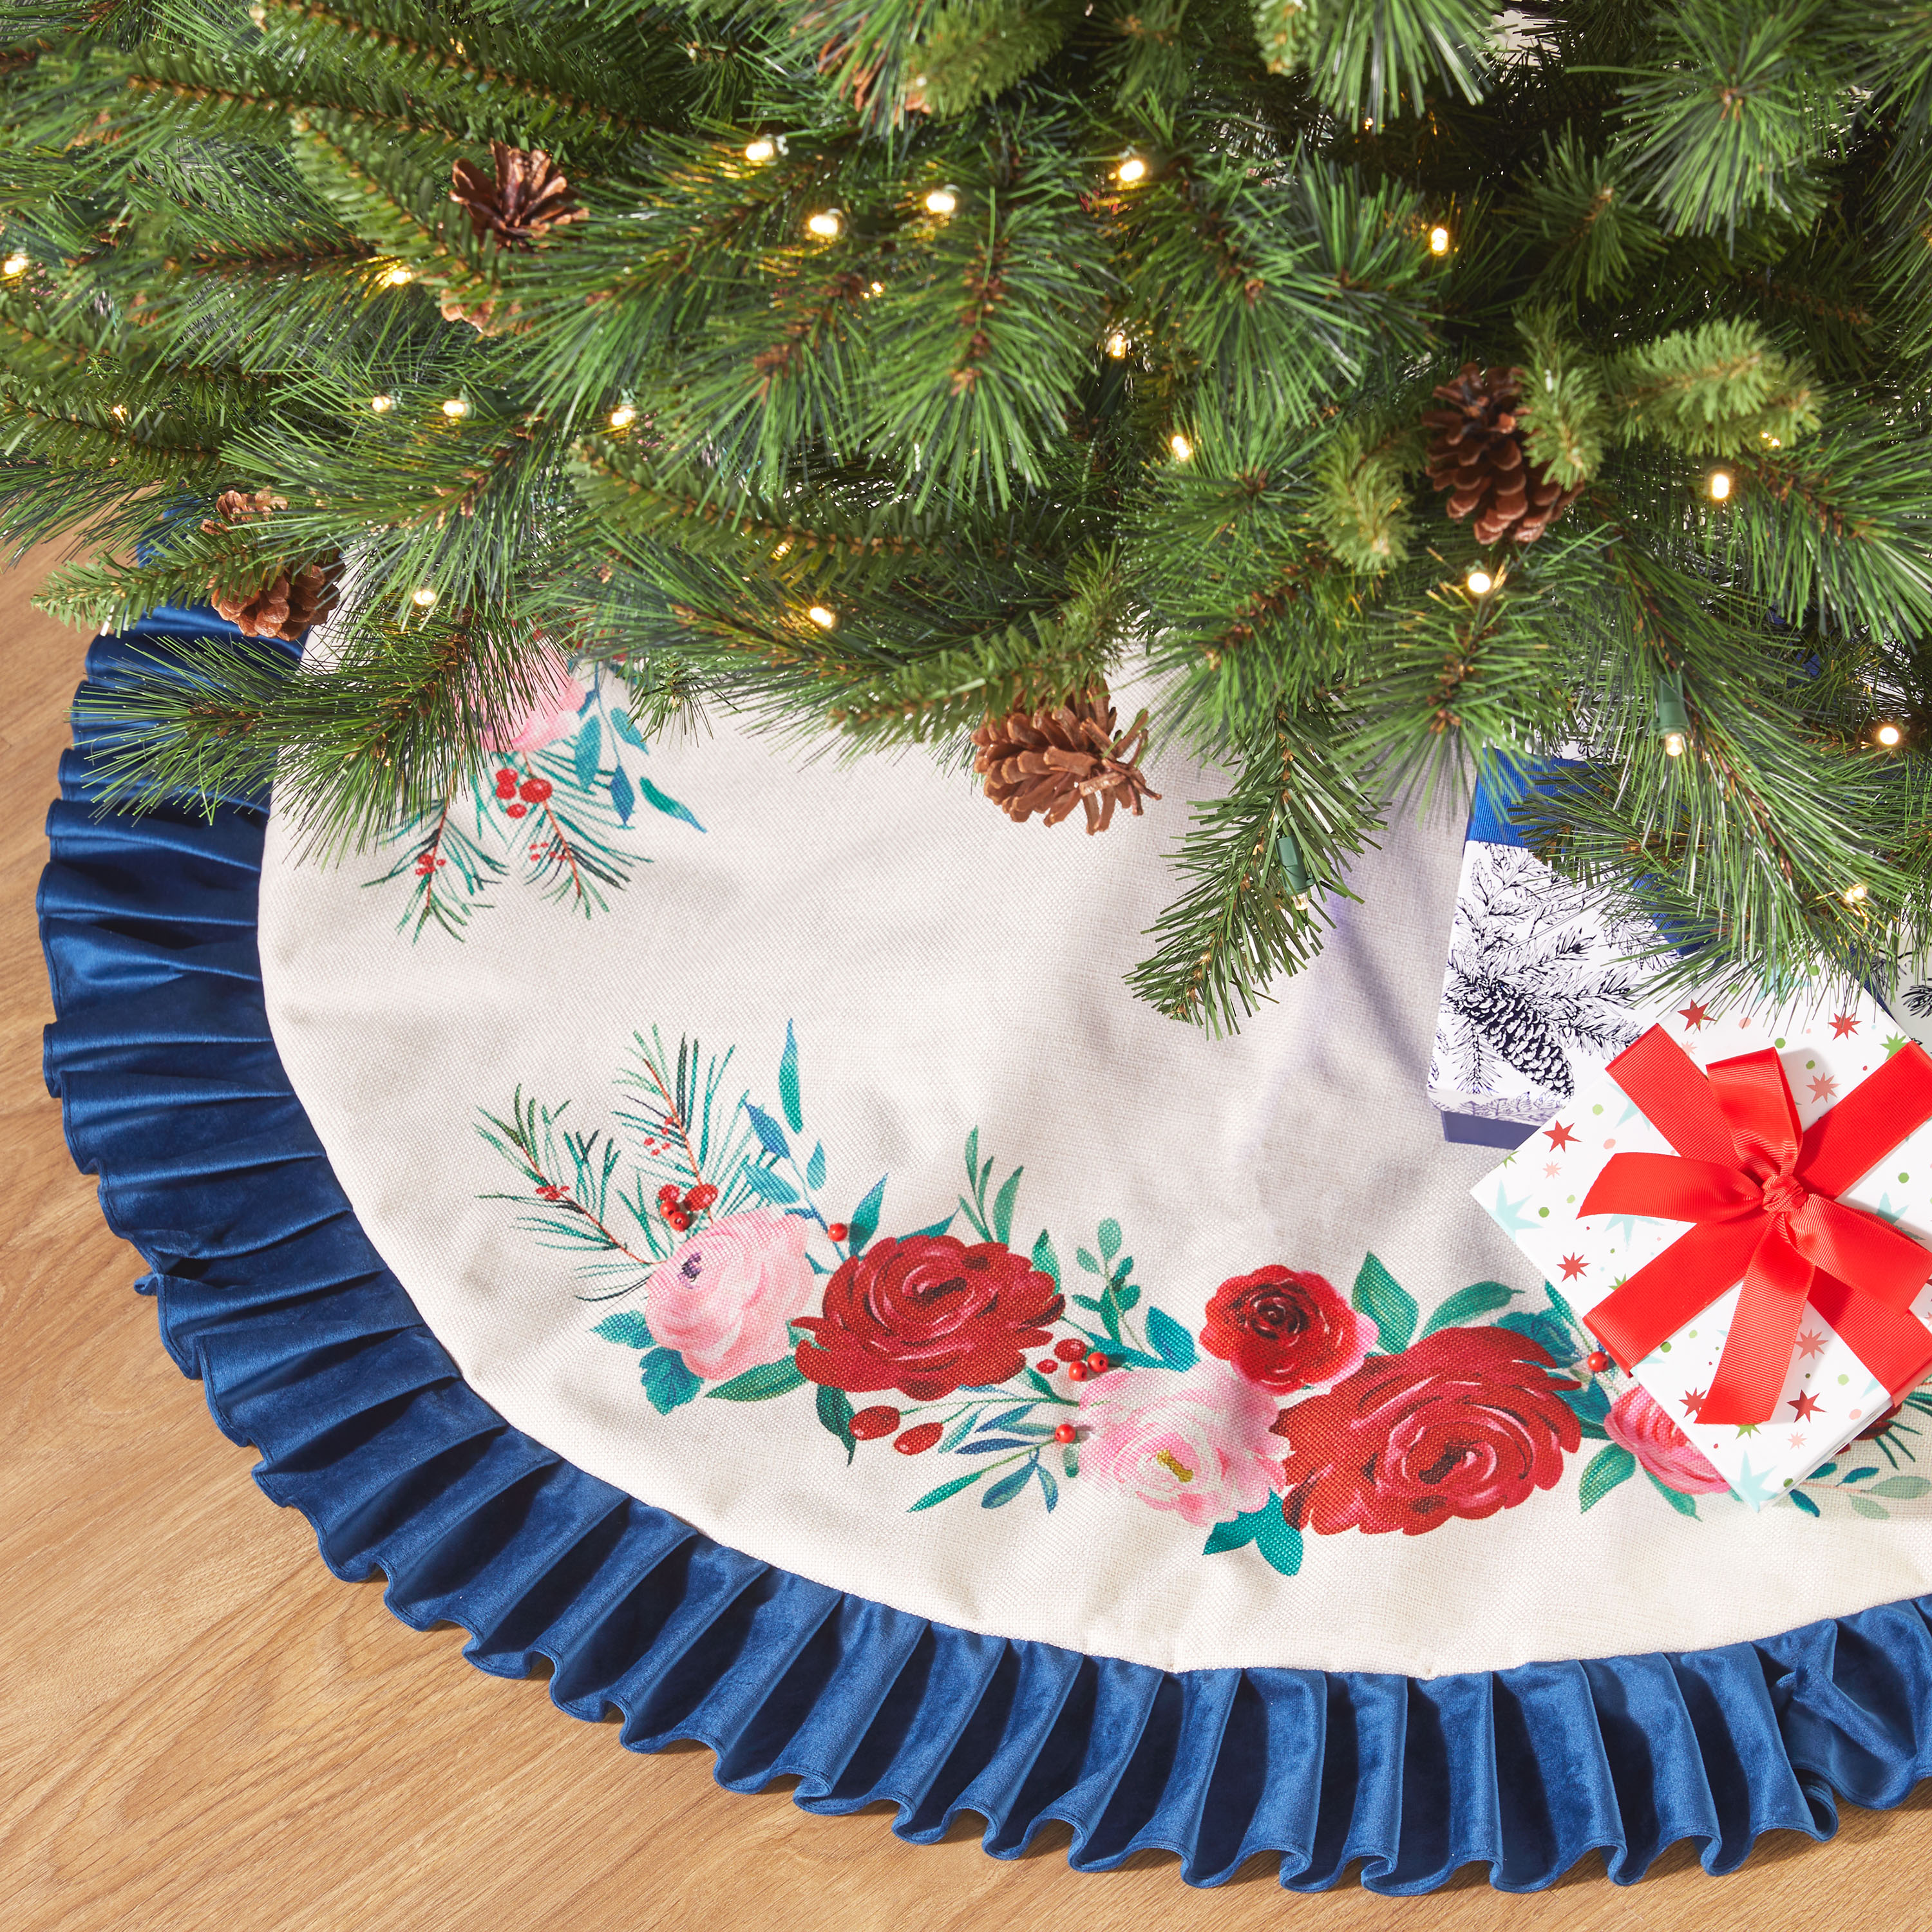 The Pioneer Woman Blue Ruffle & Red Roses Christmas Tree Skirt, 48" - image 1 of 5